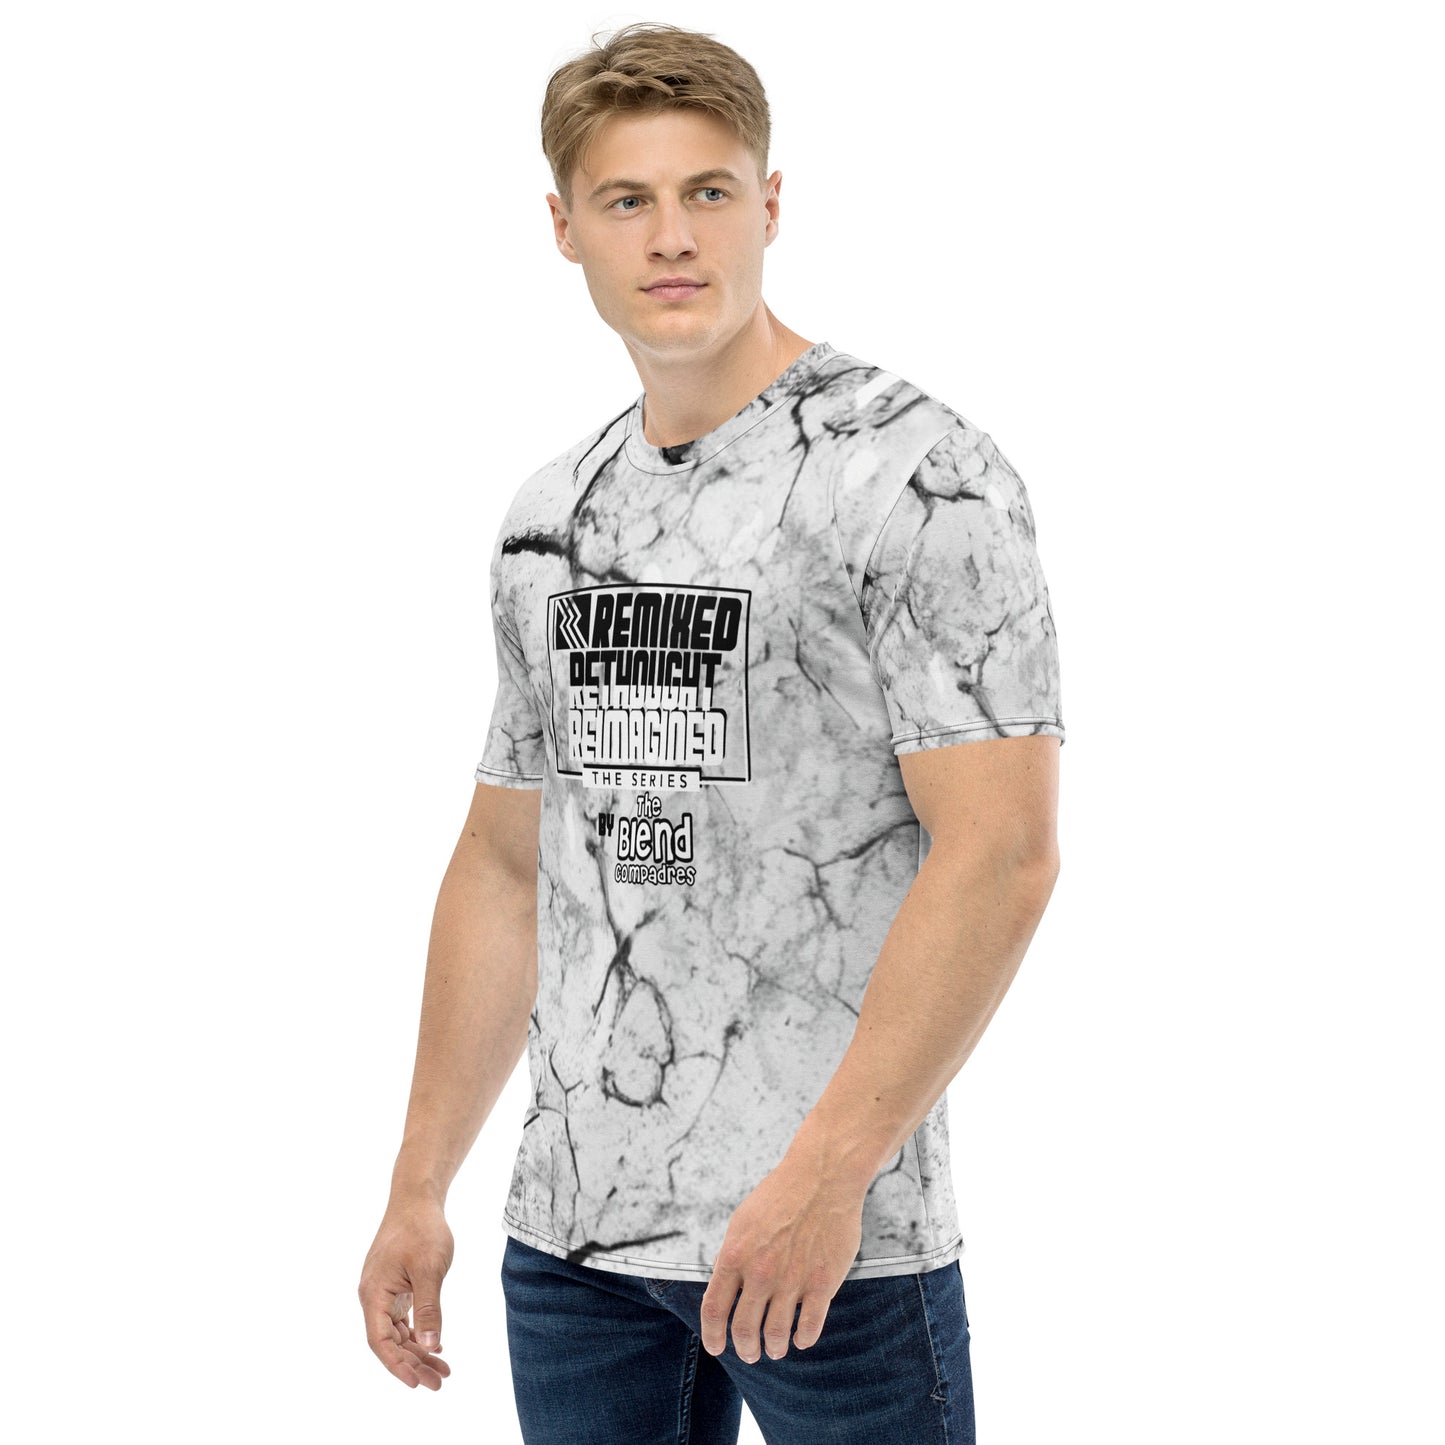 The Blend Compadres R3 Men's t-shirt - Another Bodega